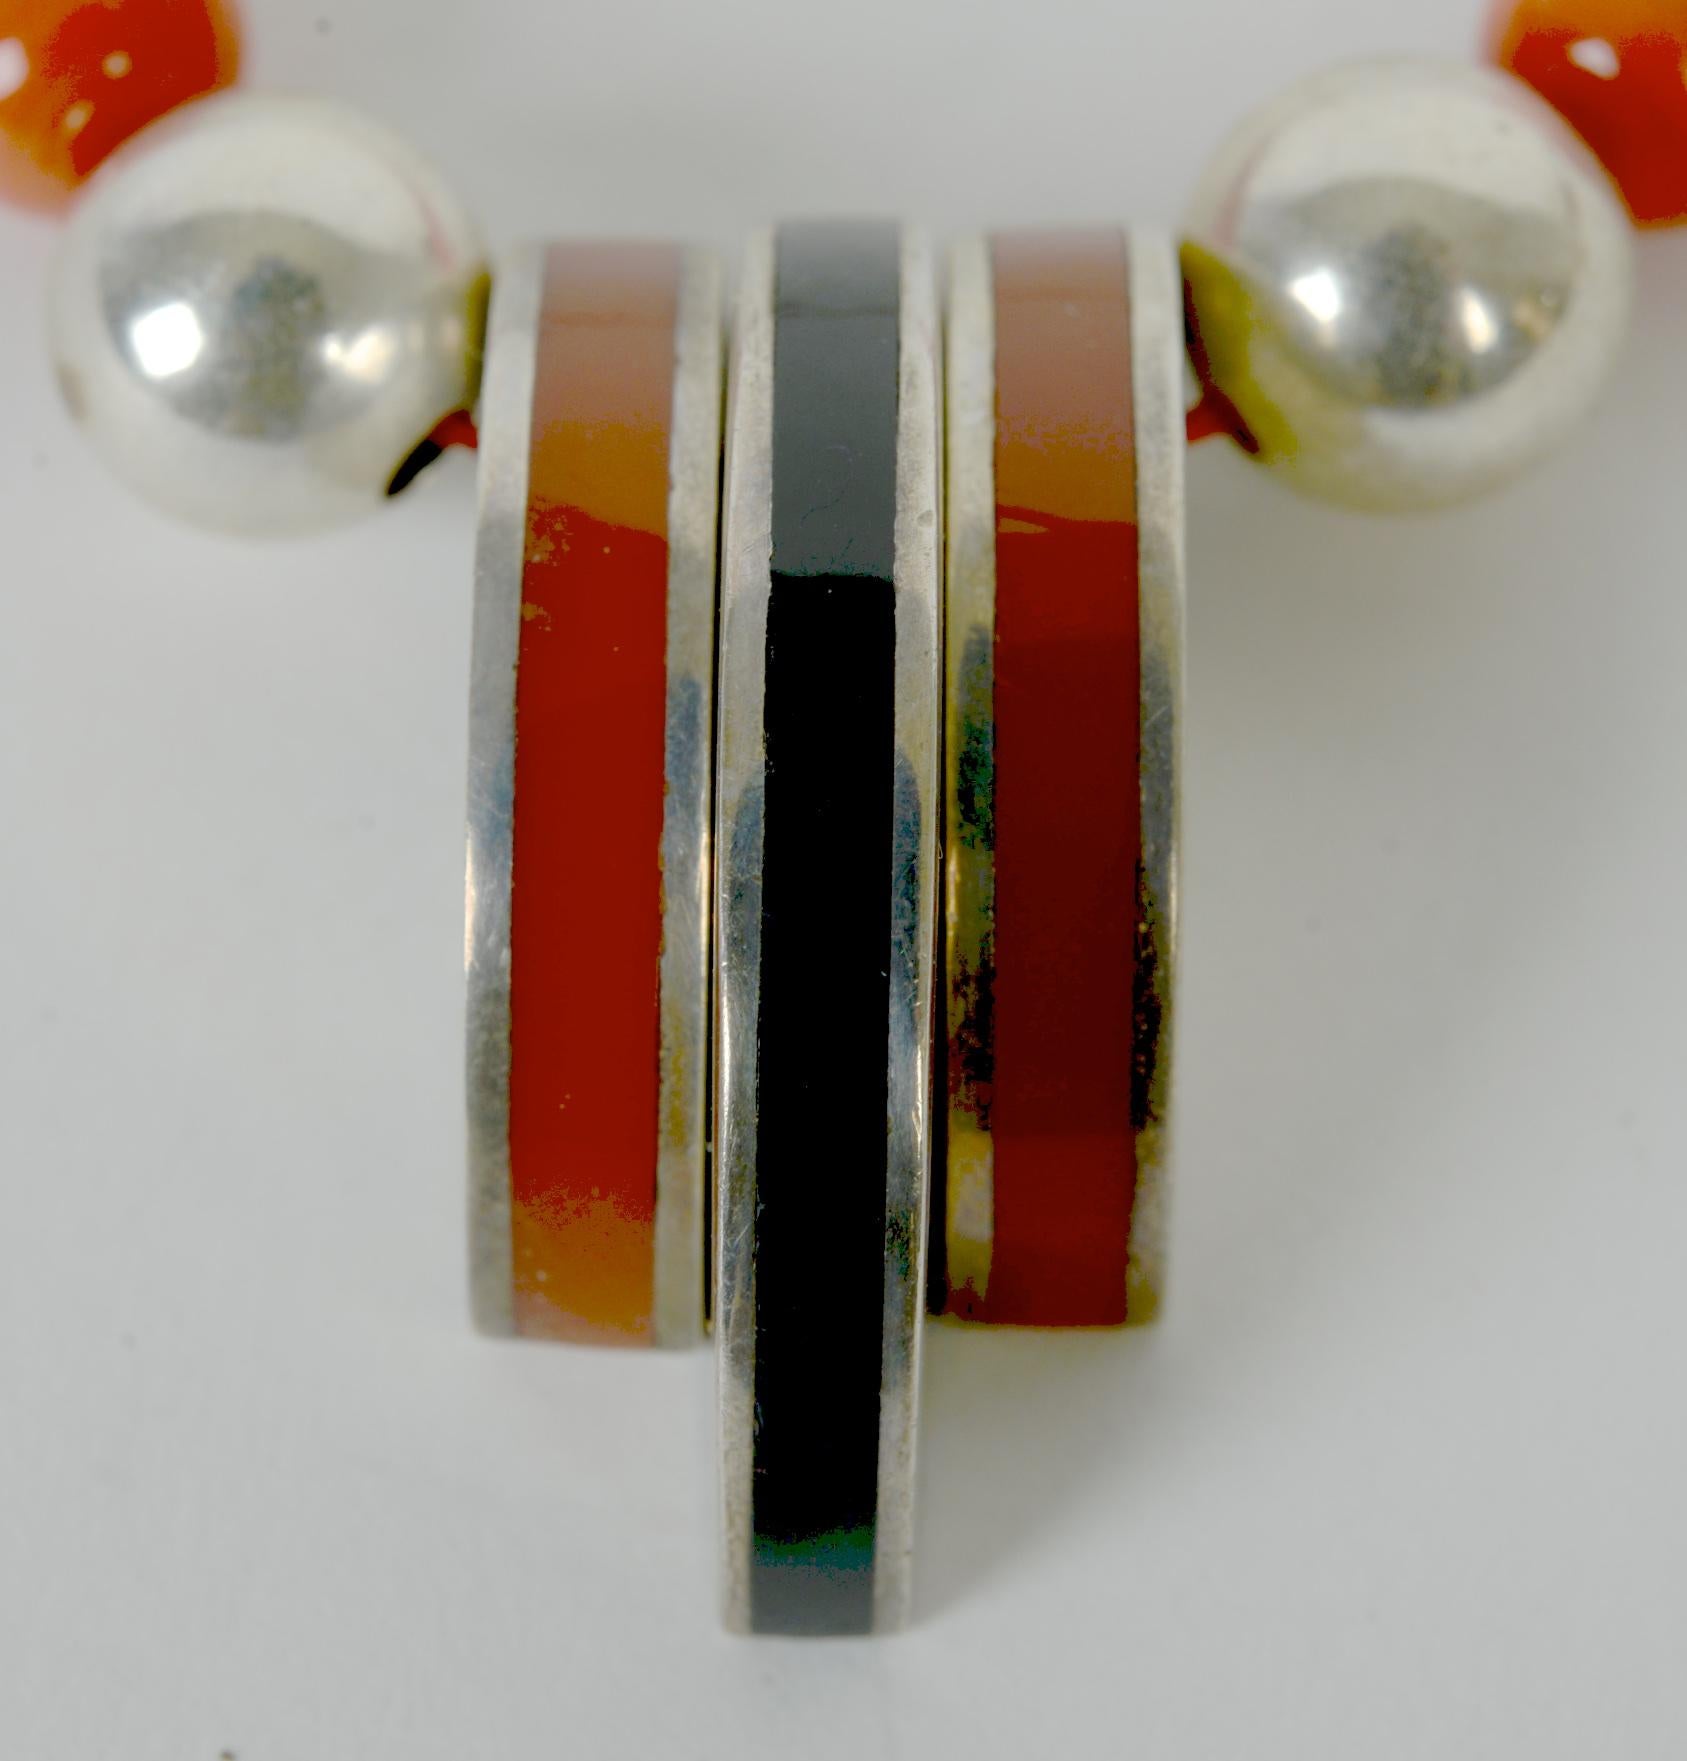 Mid Century Art Deco Style Sterling Silver and Bakelite Necklace. A great example of Art Deco jewelry that is marked by its geometry and symmetry. The 3 piece pendant is bakelite in a silver sandwich. The necklace is made of Bakelite coral colored